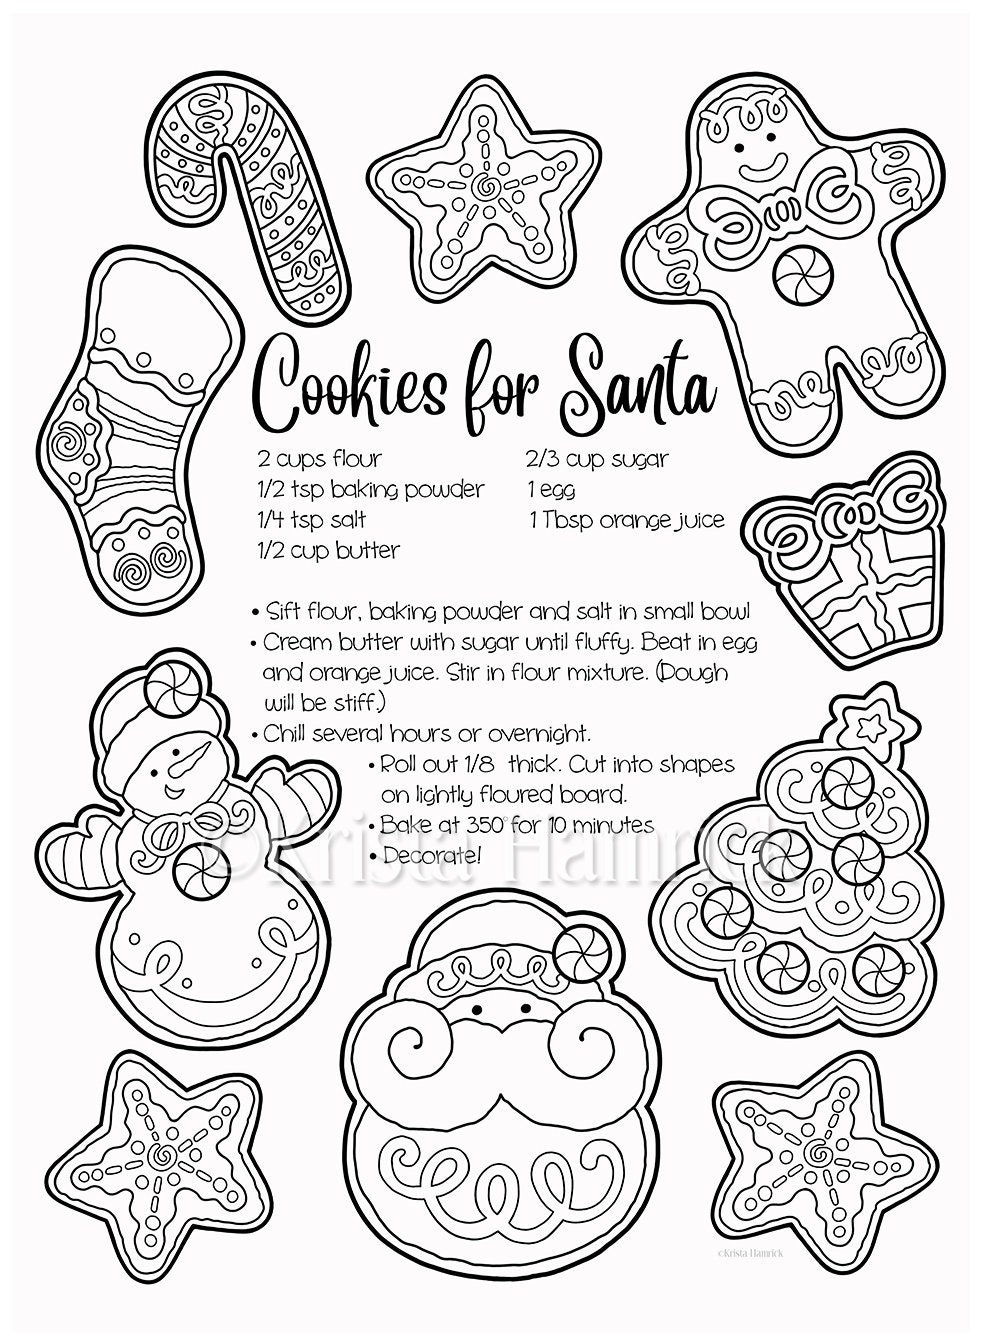 Christmas cookies a letter for santa coloring pages for christmas x download now